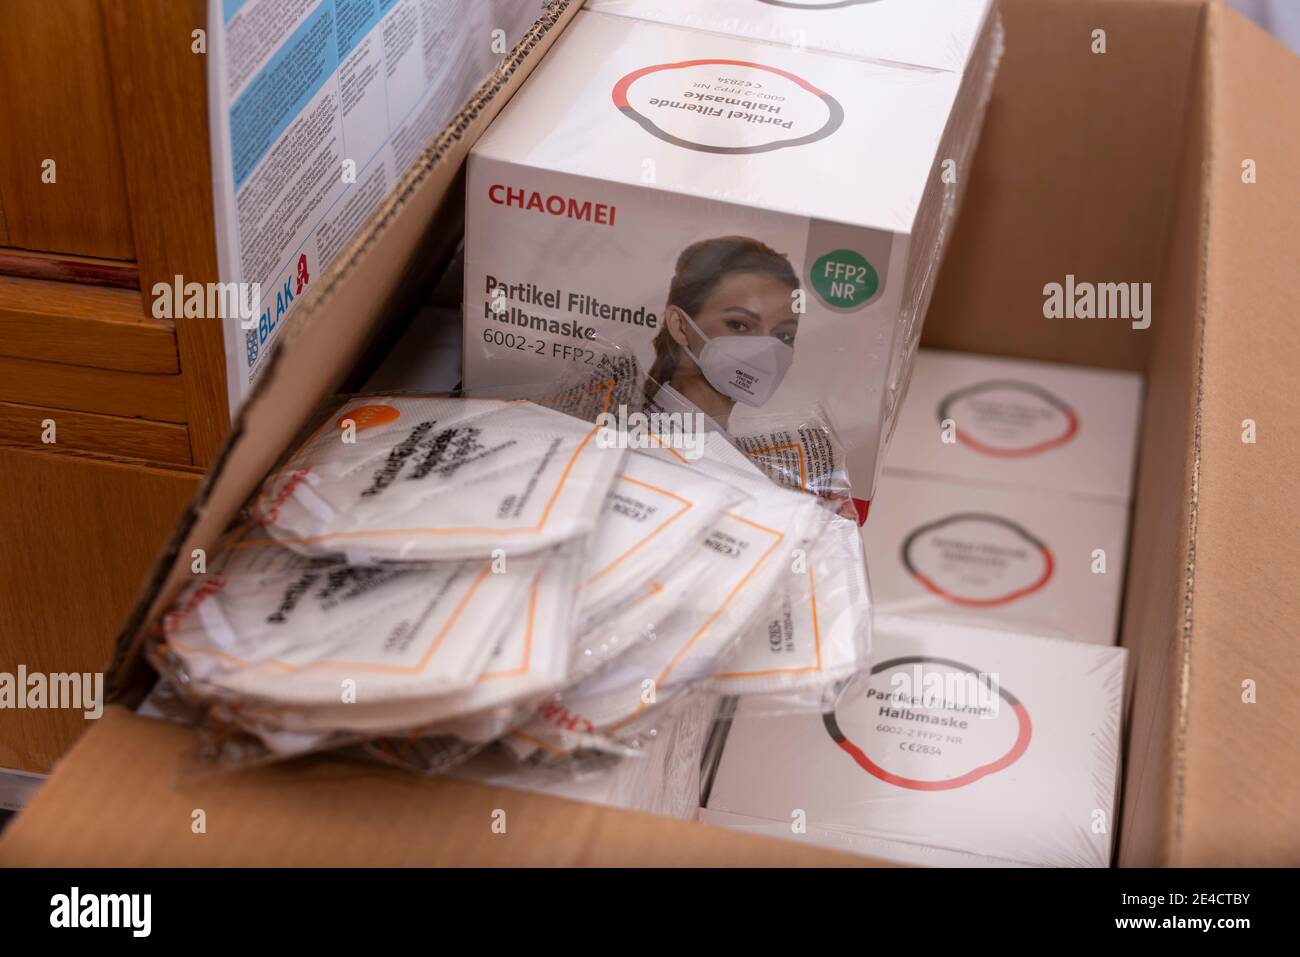 FFP2 masks are in a box Stock Photo